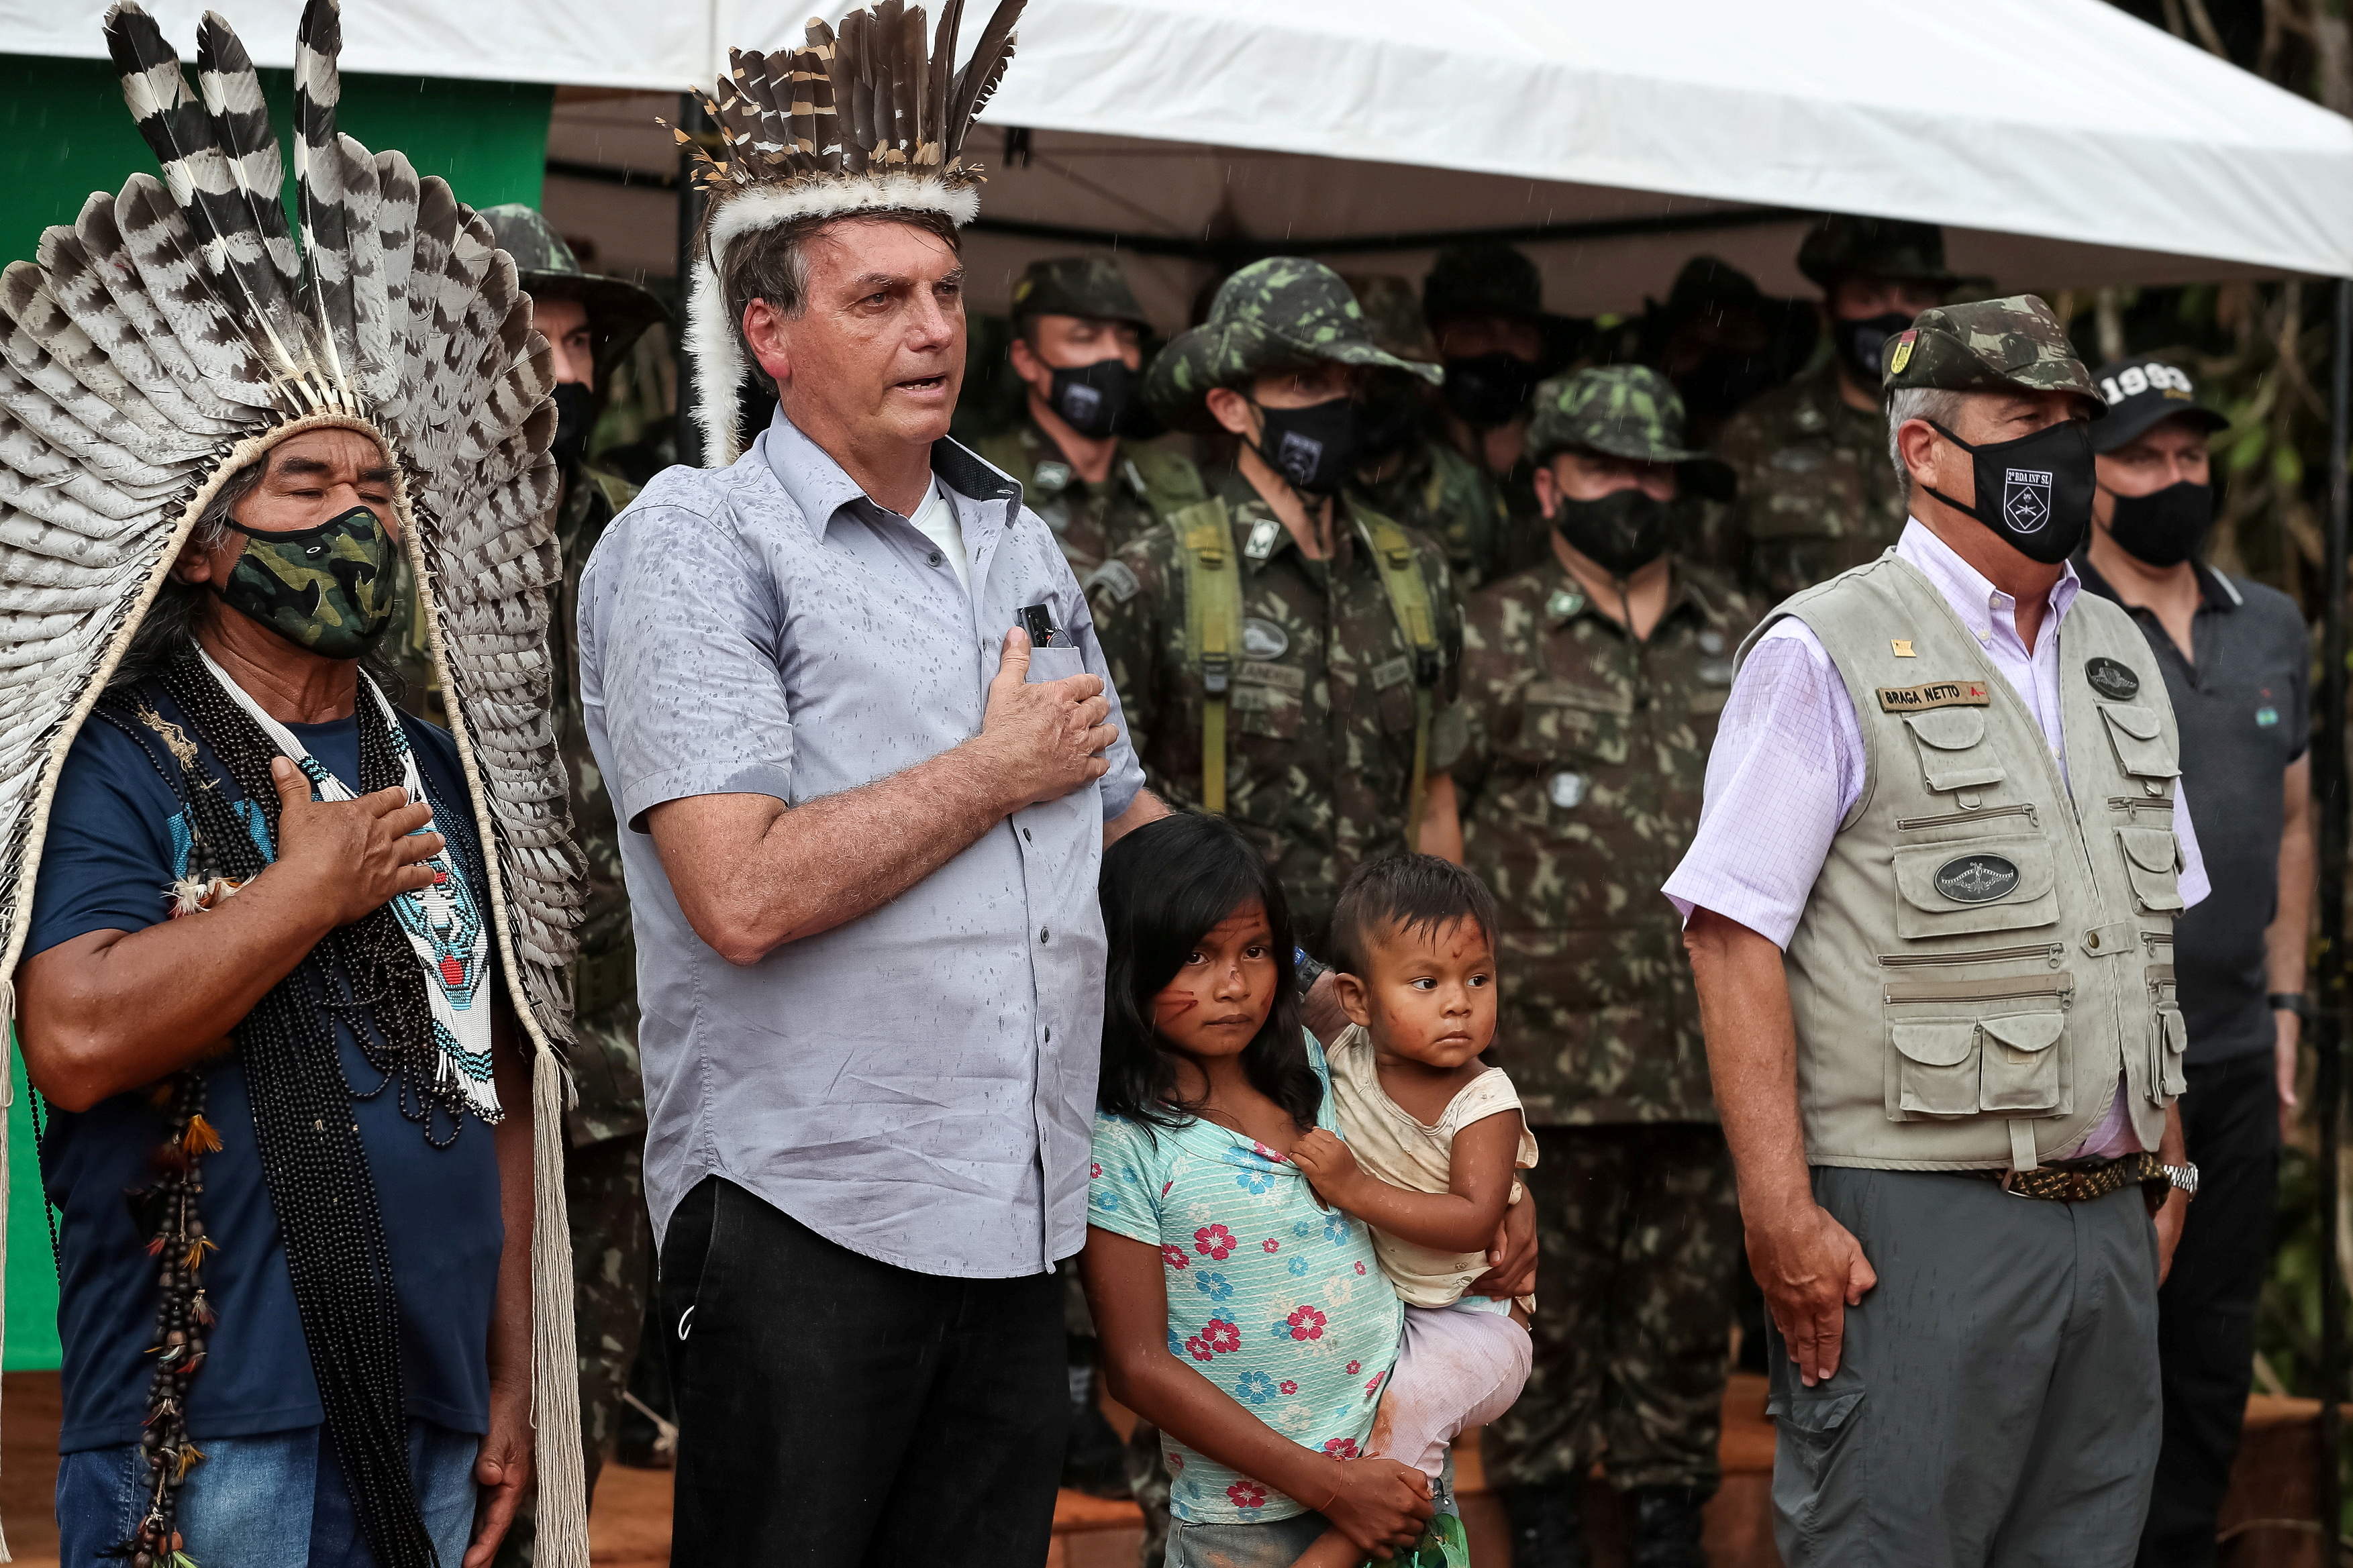 Brazil's President Jair Bolsonaro listens to national anthem next to a Tukano indigenous person in the Balaio reservation in the Upper Rio Negro river region of Amazonas state, bordering Colombia and Venezuela, near Sao Gabriel da Cachoeira, Brasil May 27, 2021.   Marcos Correa/Handout via REUTERS   